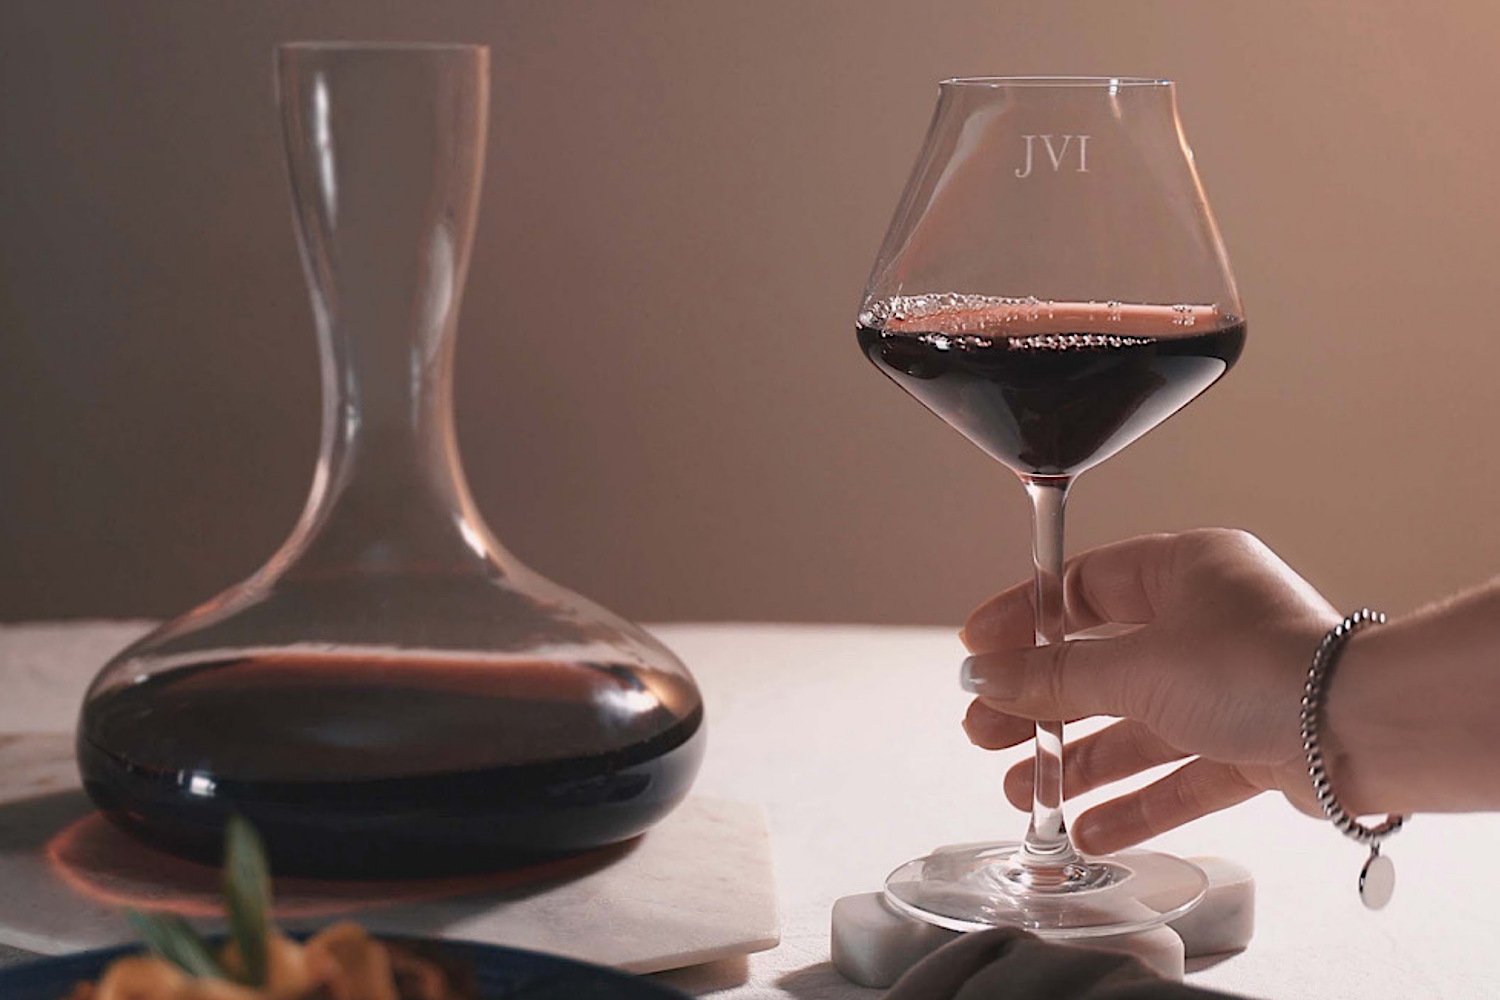 A wine decanter with red wine beside a red wine glass. the glass is personalised and engraved with initials JVI